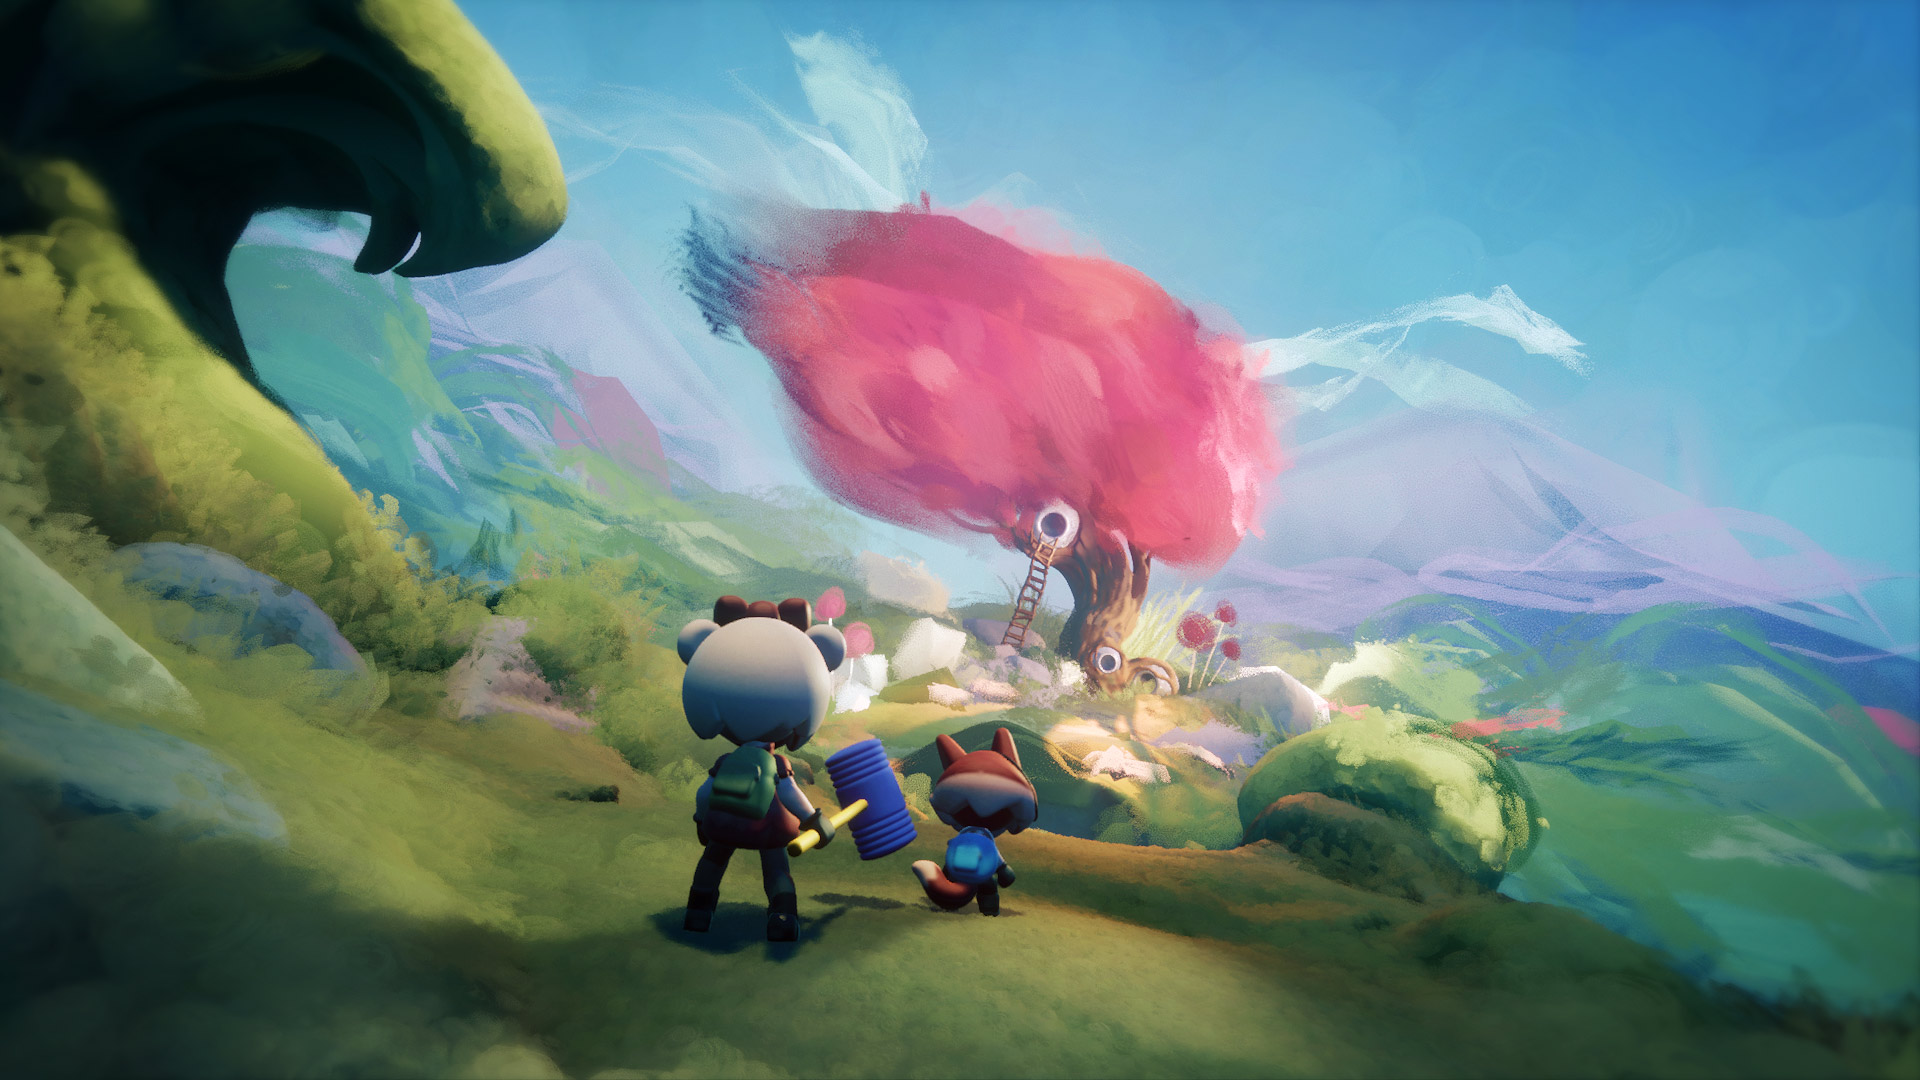 'Dreams' is launching in Early Access this spring